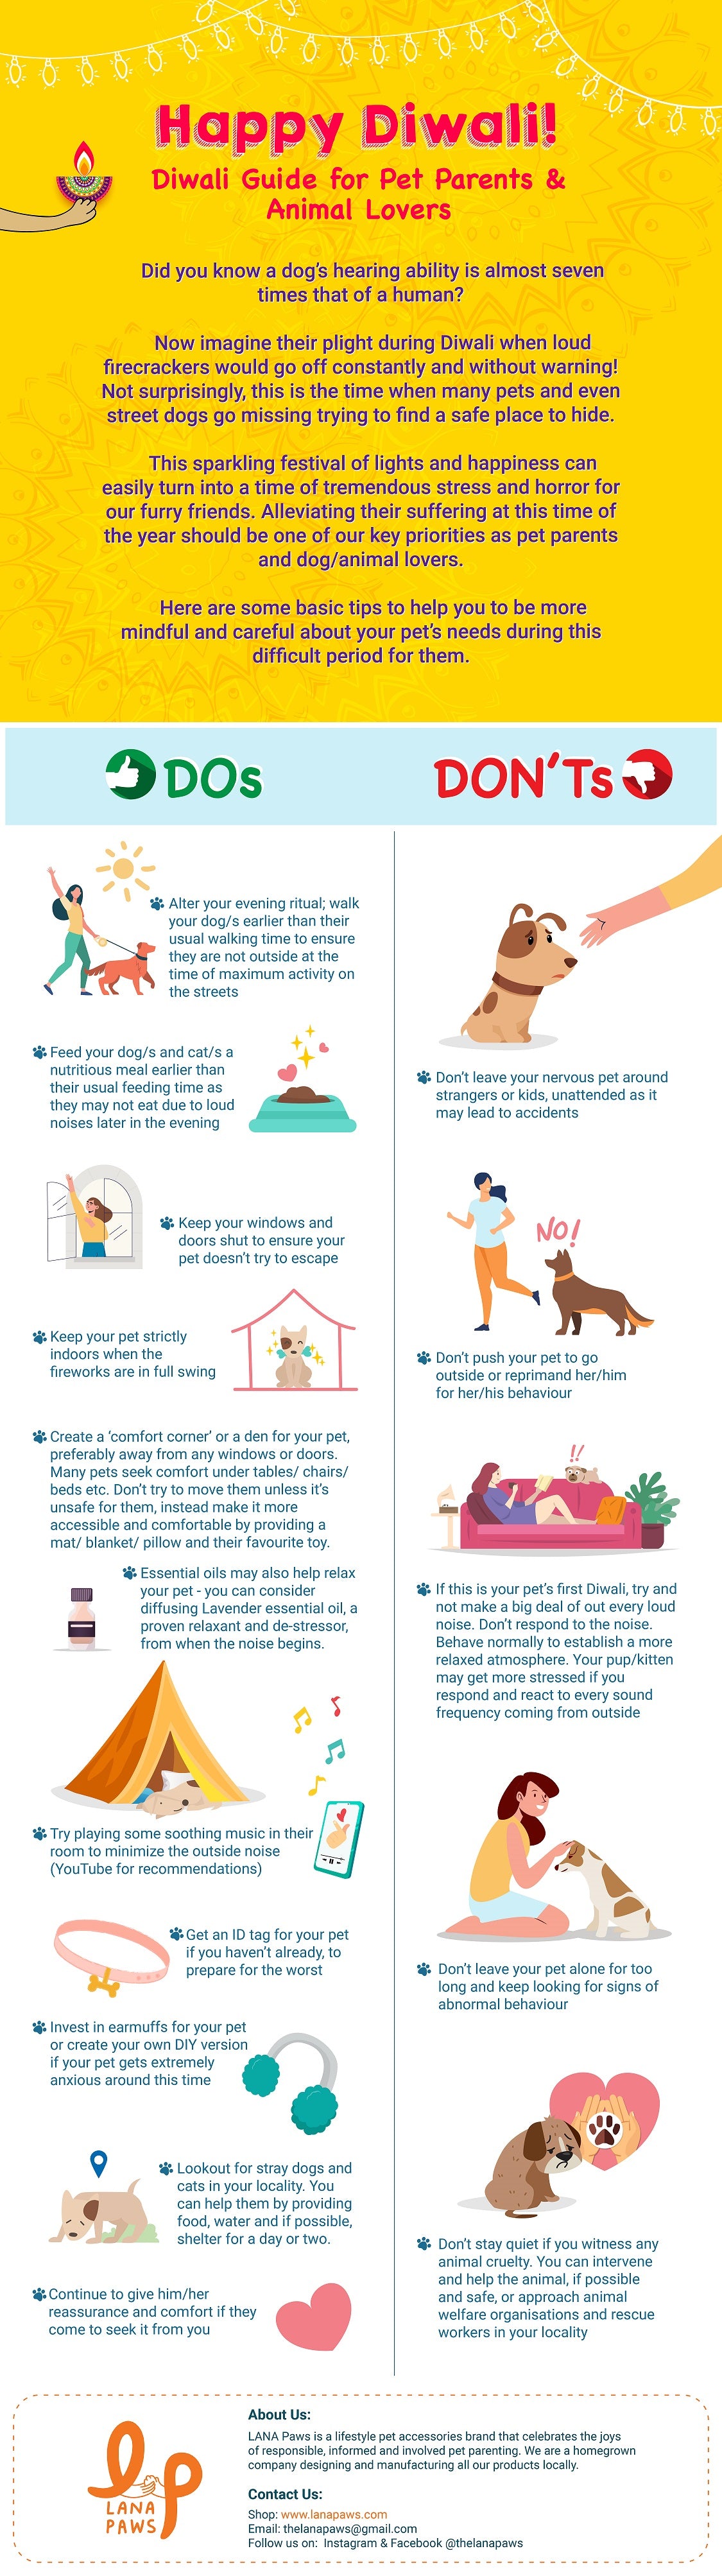 how to help animals and pets during Diwali